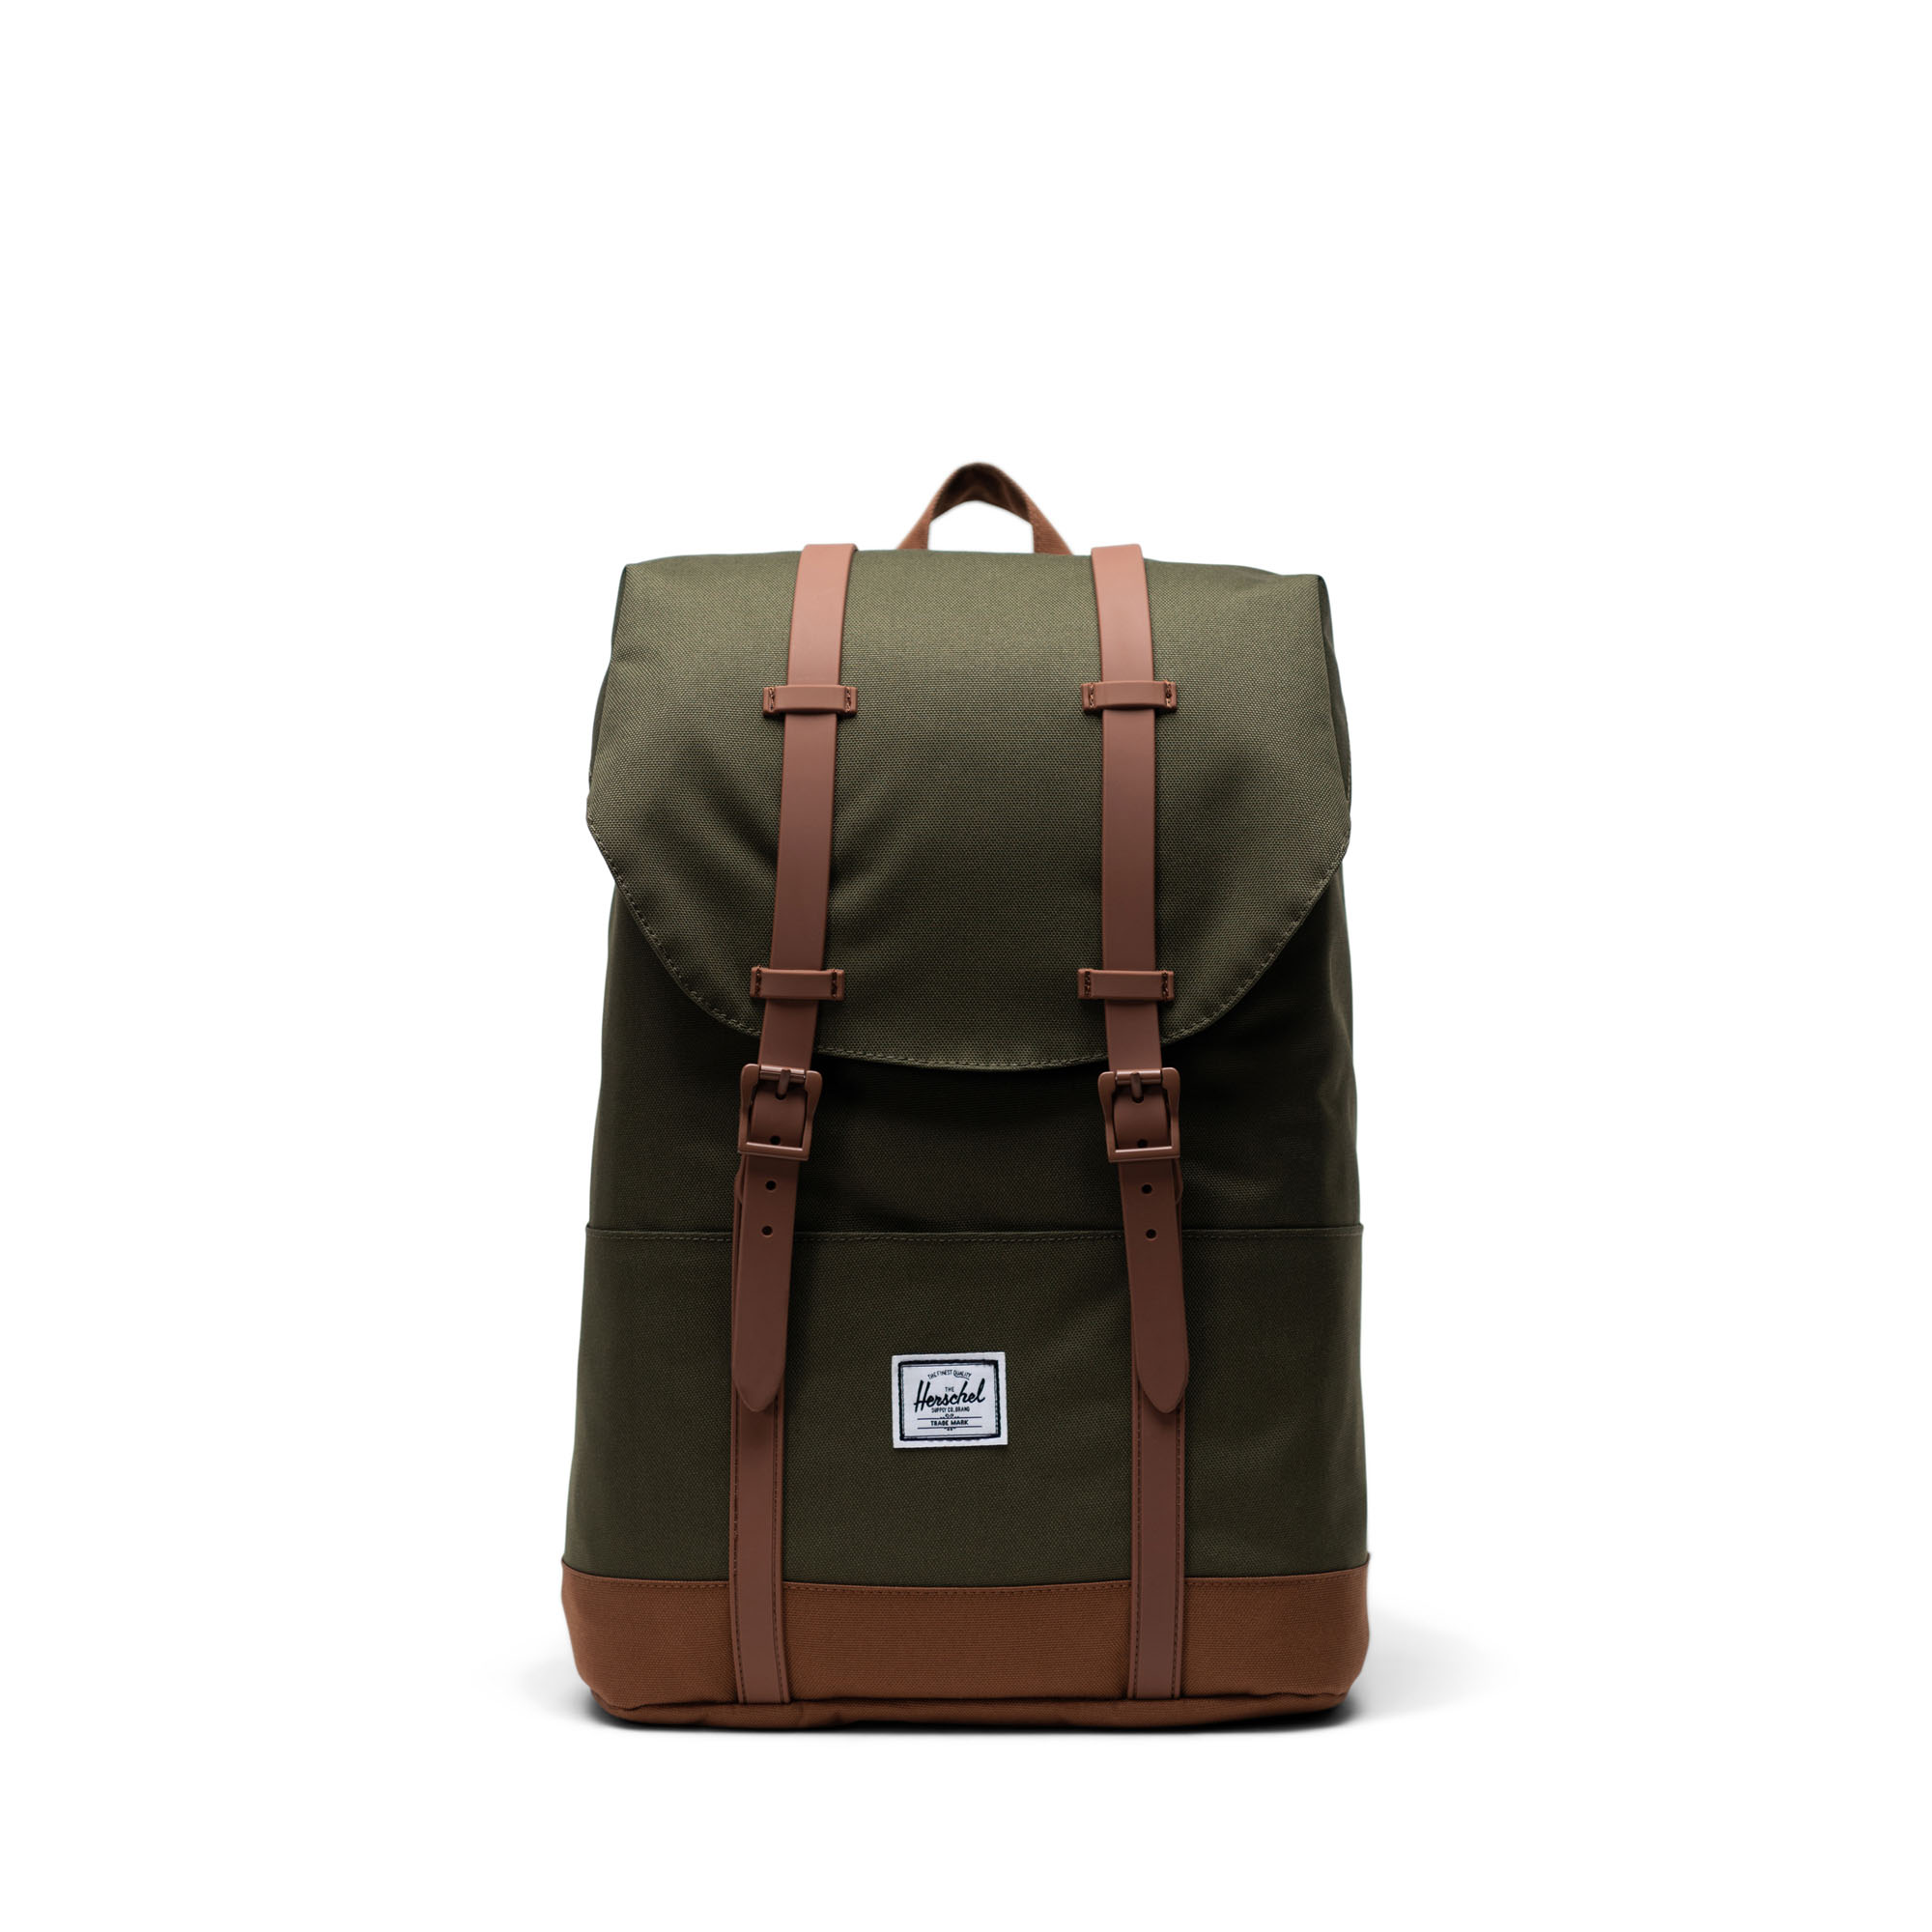 Retreat Backpack Youth | Herschel Supply Co.